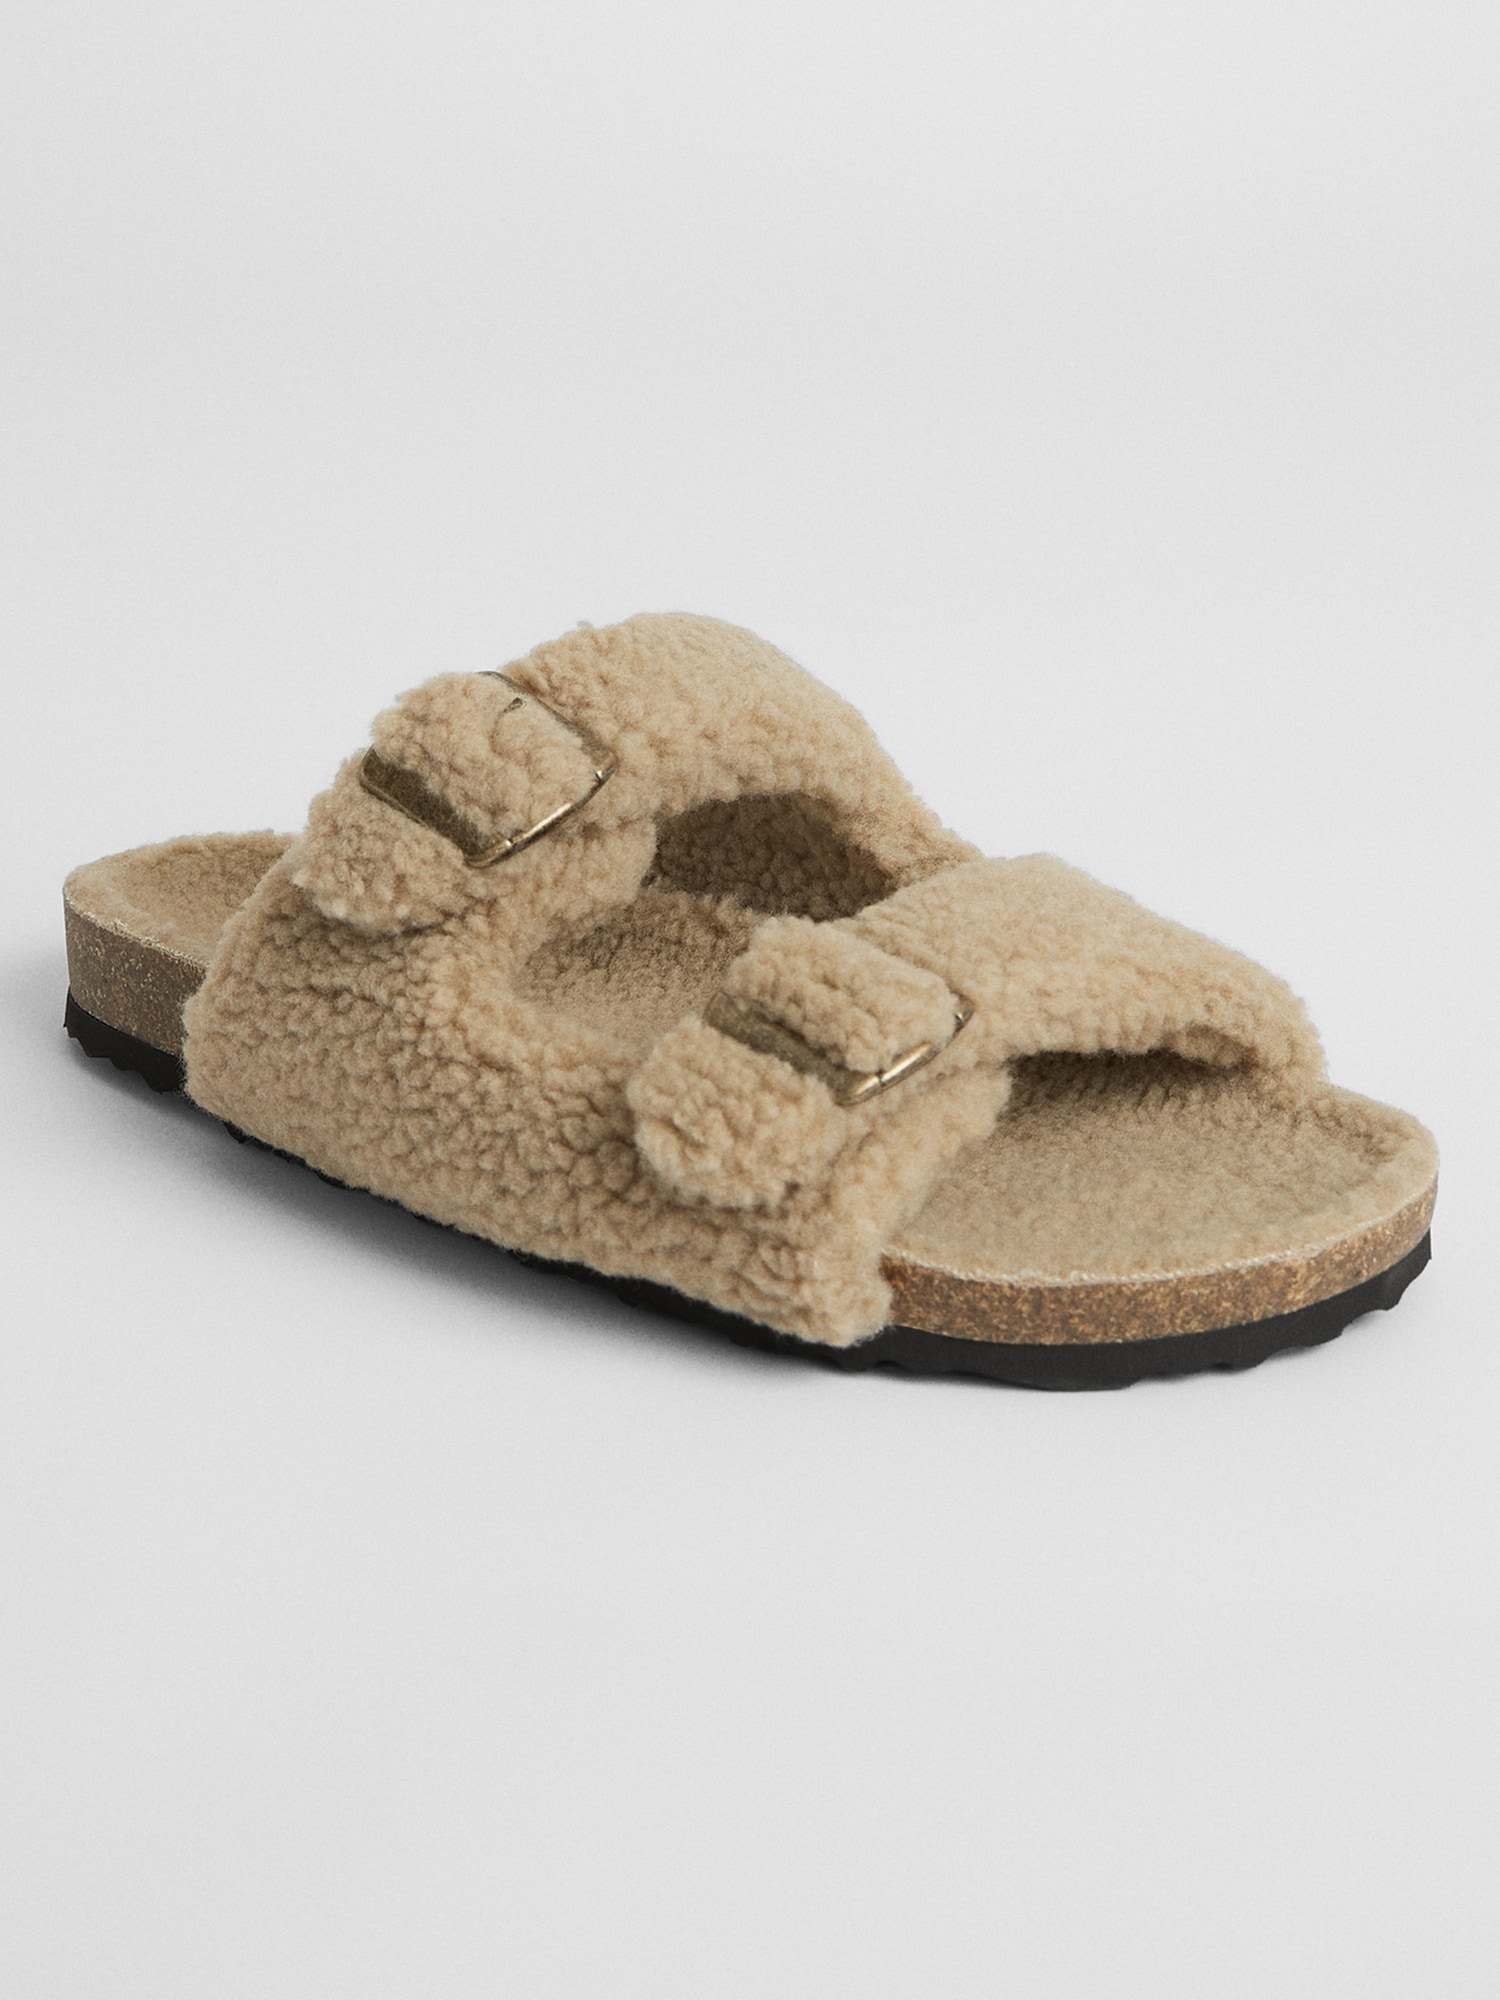 Gap Factory: Up to 75% Off + Extra 50% Off Clearance, Sherpa Buckle-Strap Sandals $15 + Free Shipping on $50+